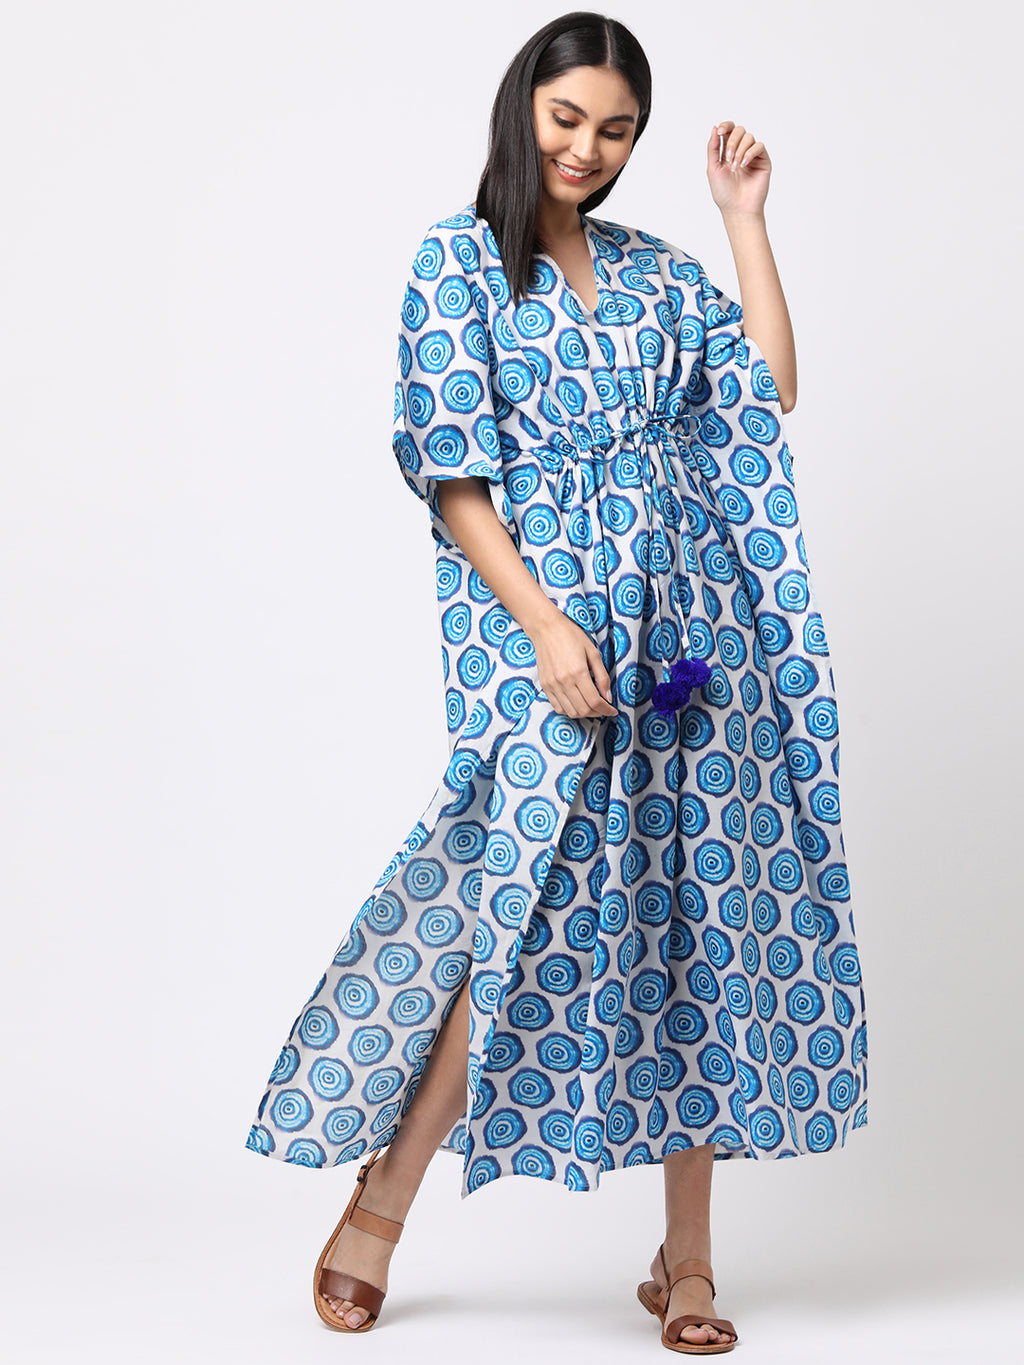 cheap beachwear discount fashion sasta garment online Beachwear party wear pool party beach side shop online India the beach company women dresses cute travel trip clothes cod free delivery maxi jumpsuit sarong made in India discount maxi kaftan printed blue white tie dye